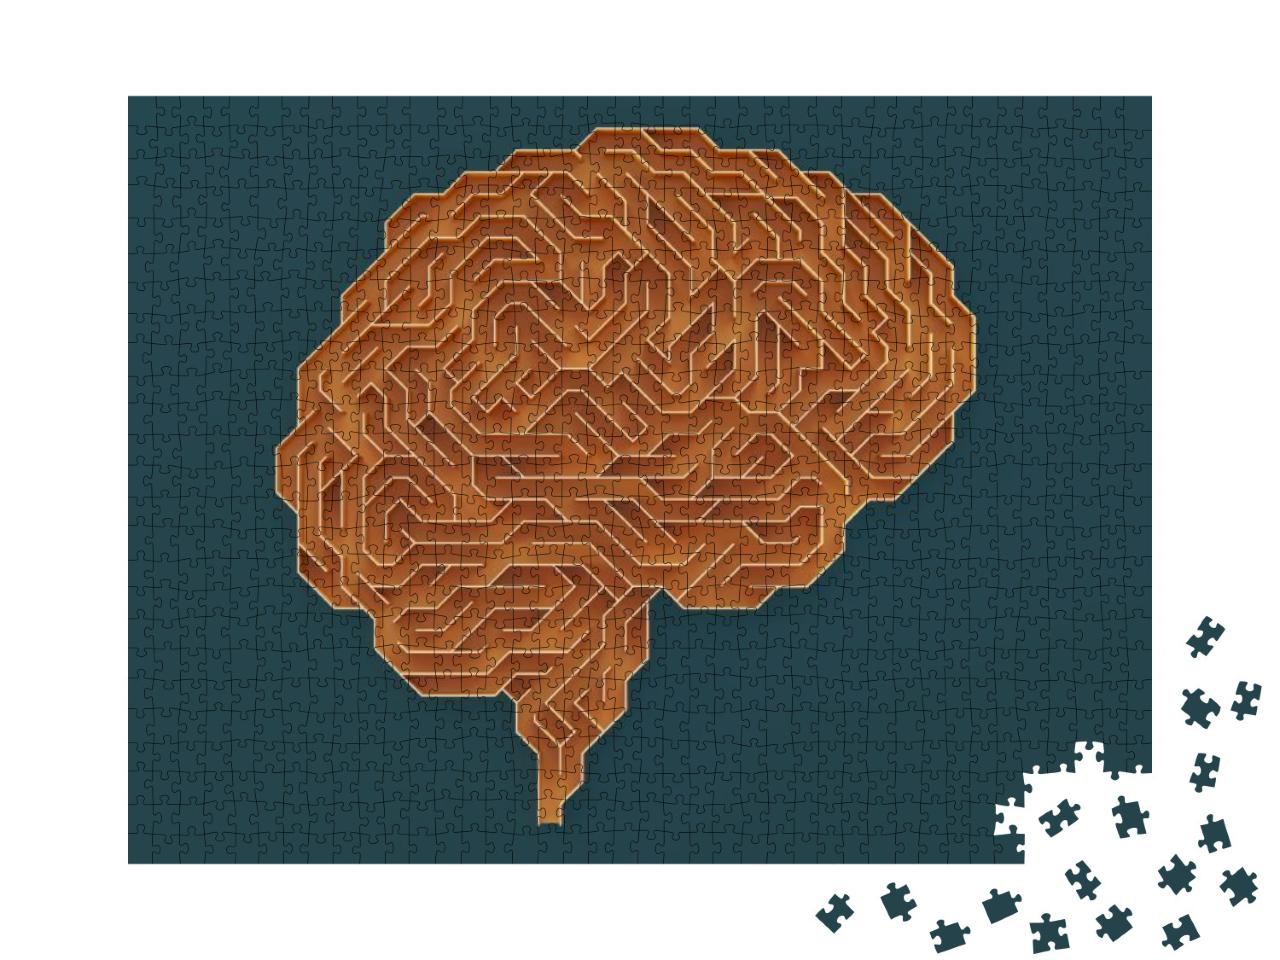 Brain Shaped Maze with Clipping Path Included. Conceptual... Jigsaw Puzzle with 1000 pieces